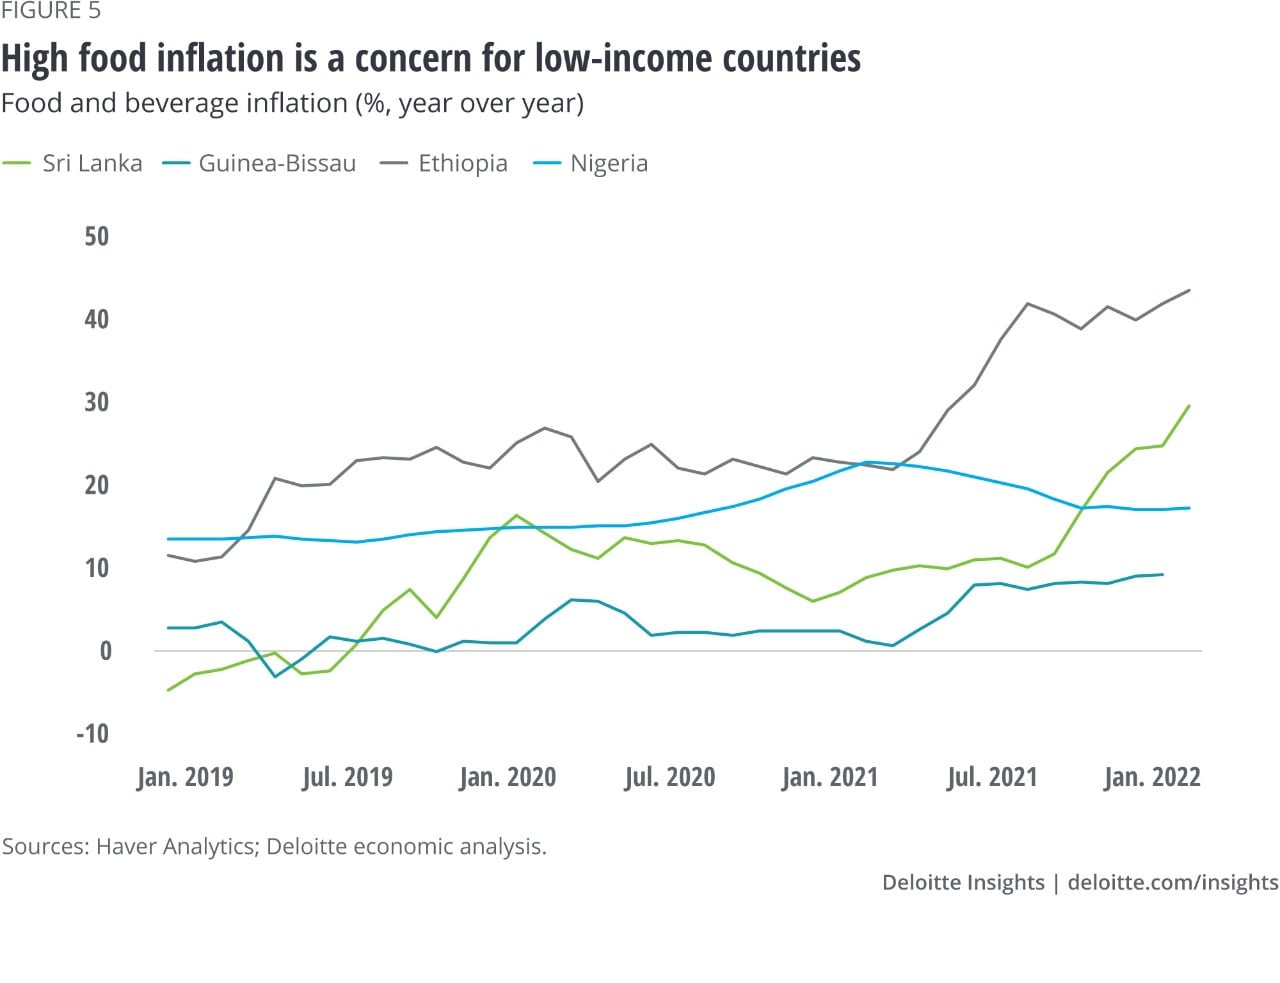 Figure 5. High food inflation is a concern for low-income countries